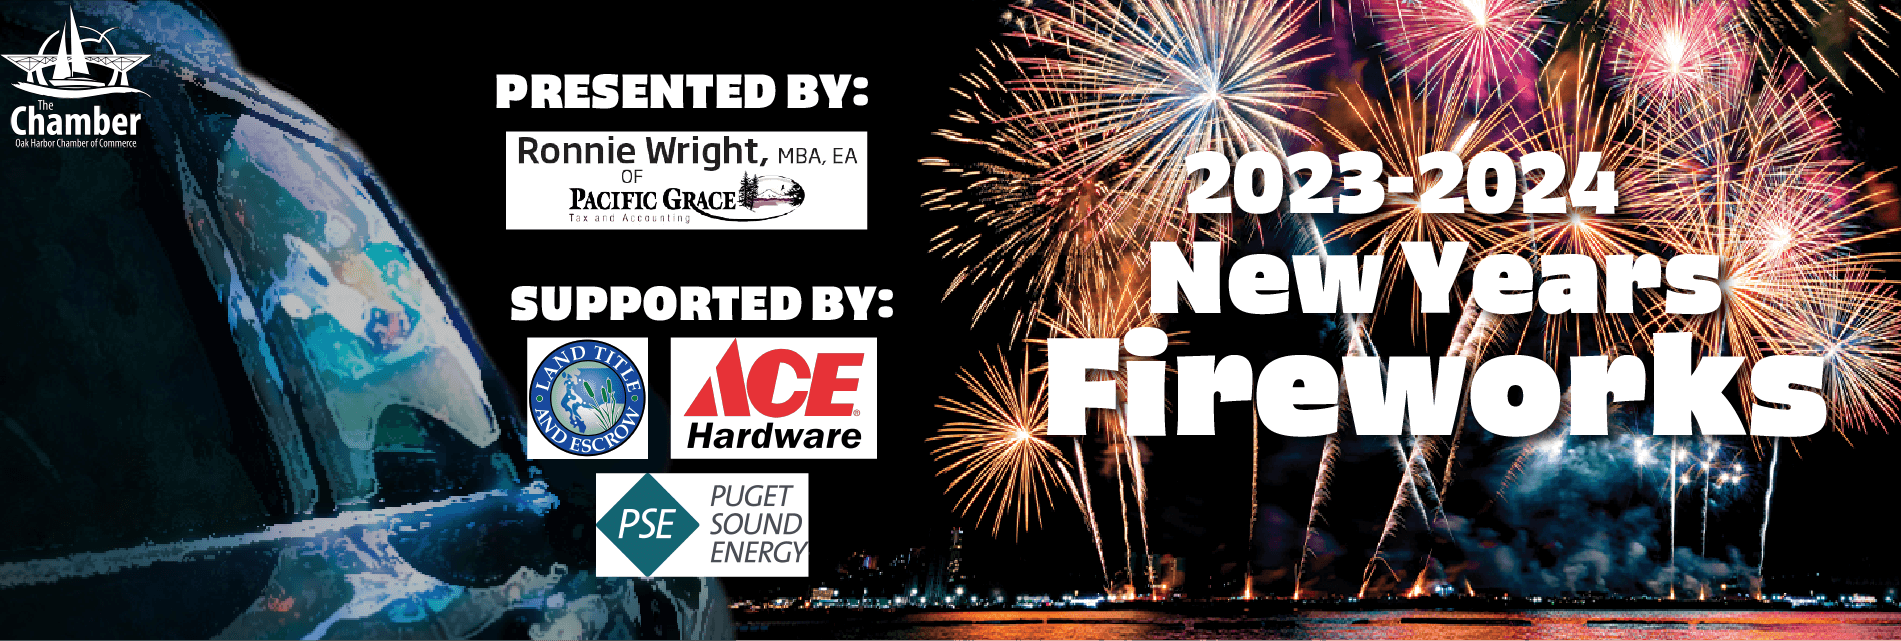 2023-2024 New Years Fireworks Presented by Ronnie Wright and Supported by Ace Hardware, Land Title and Escrow, and Puget Sound Energy.